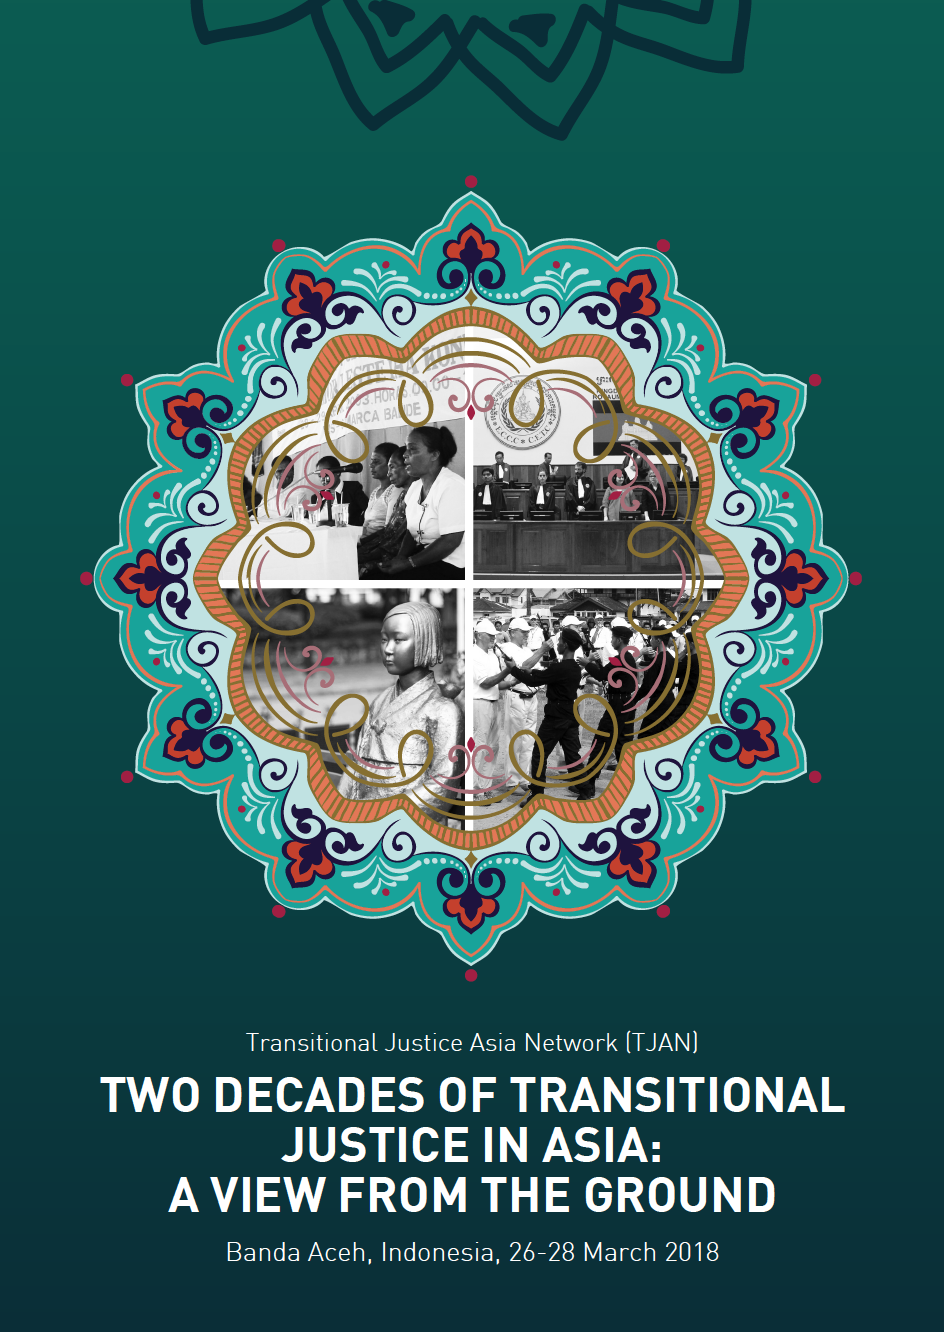 Workshop on Two Decades of Transitional Justice in Asia (Banda Aceh, Indonesia, 24-26 March 2018)